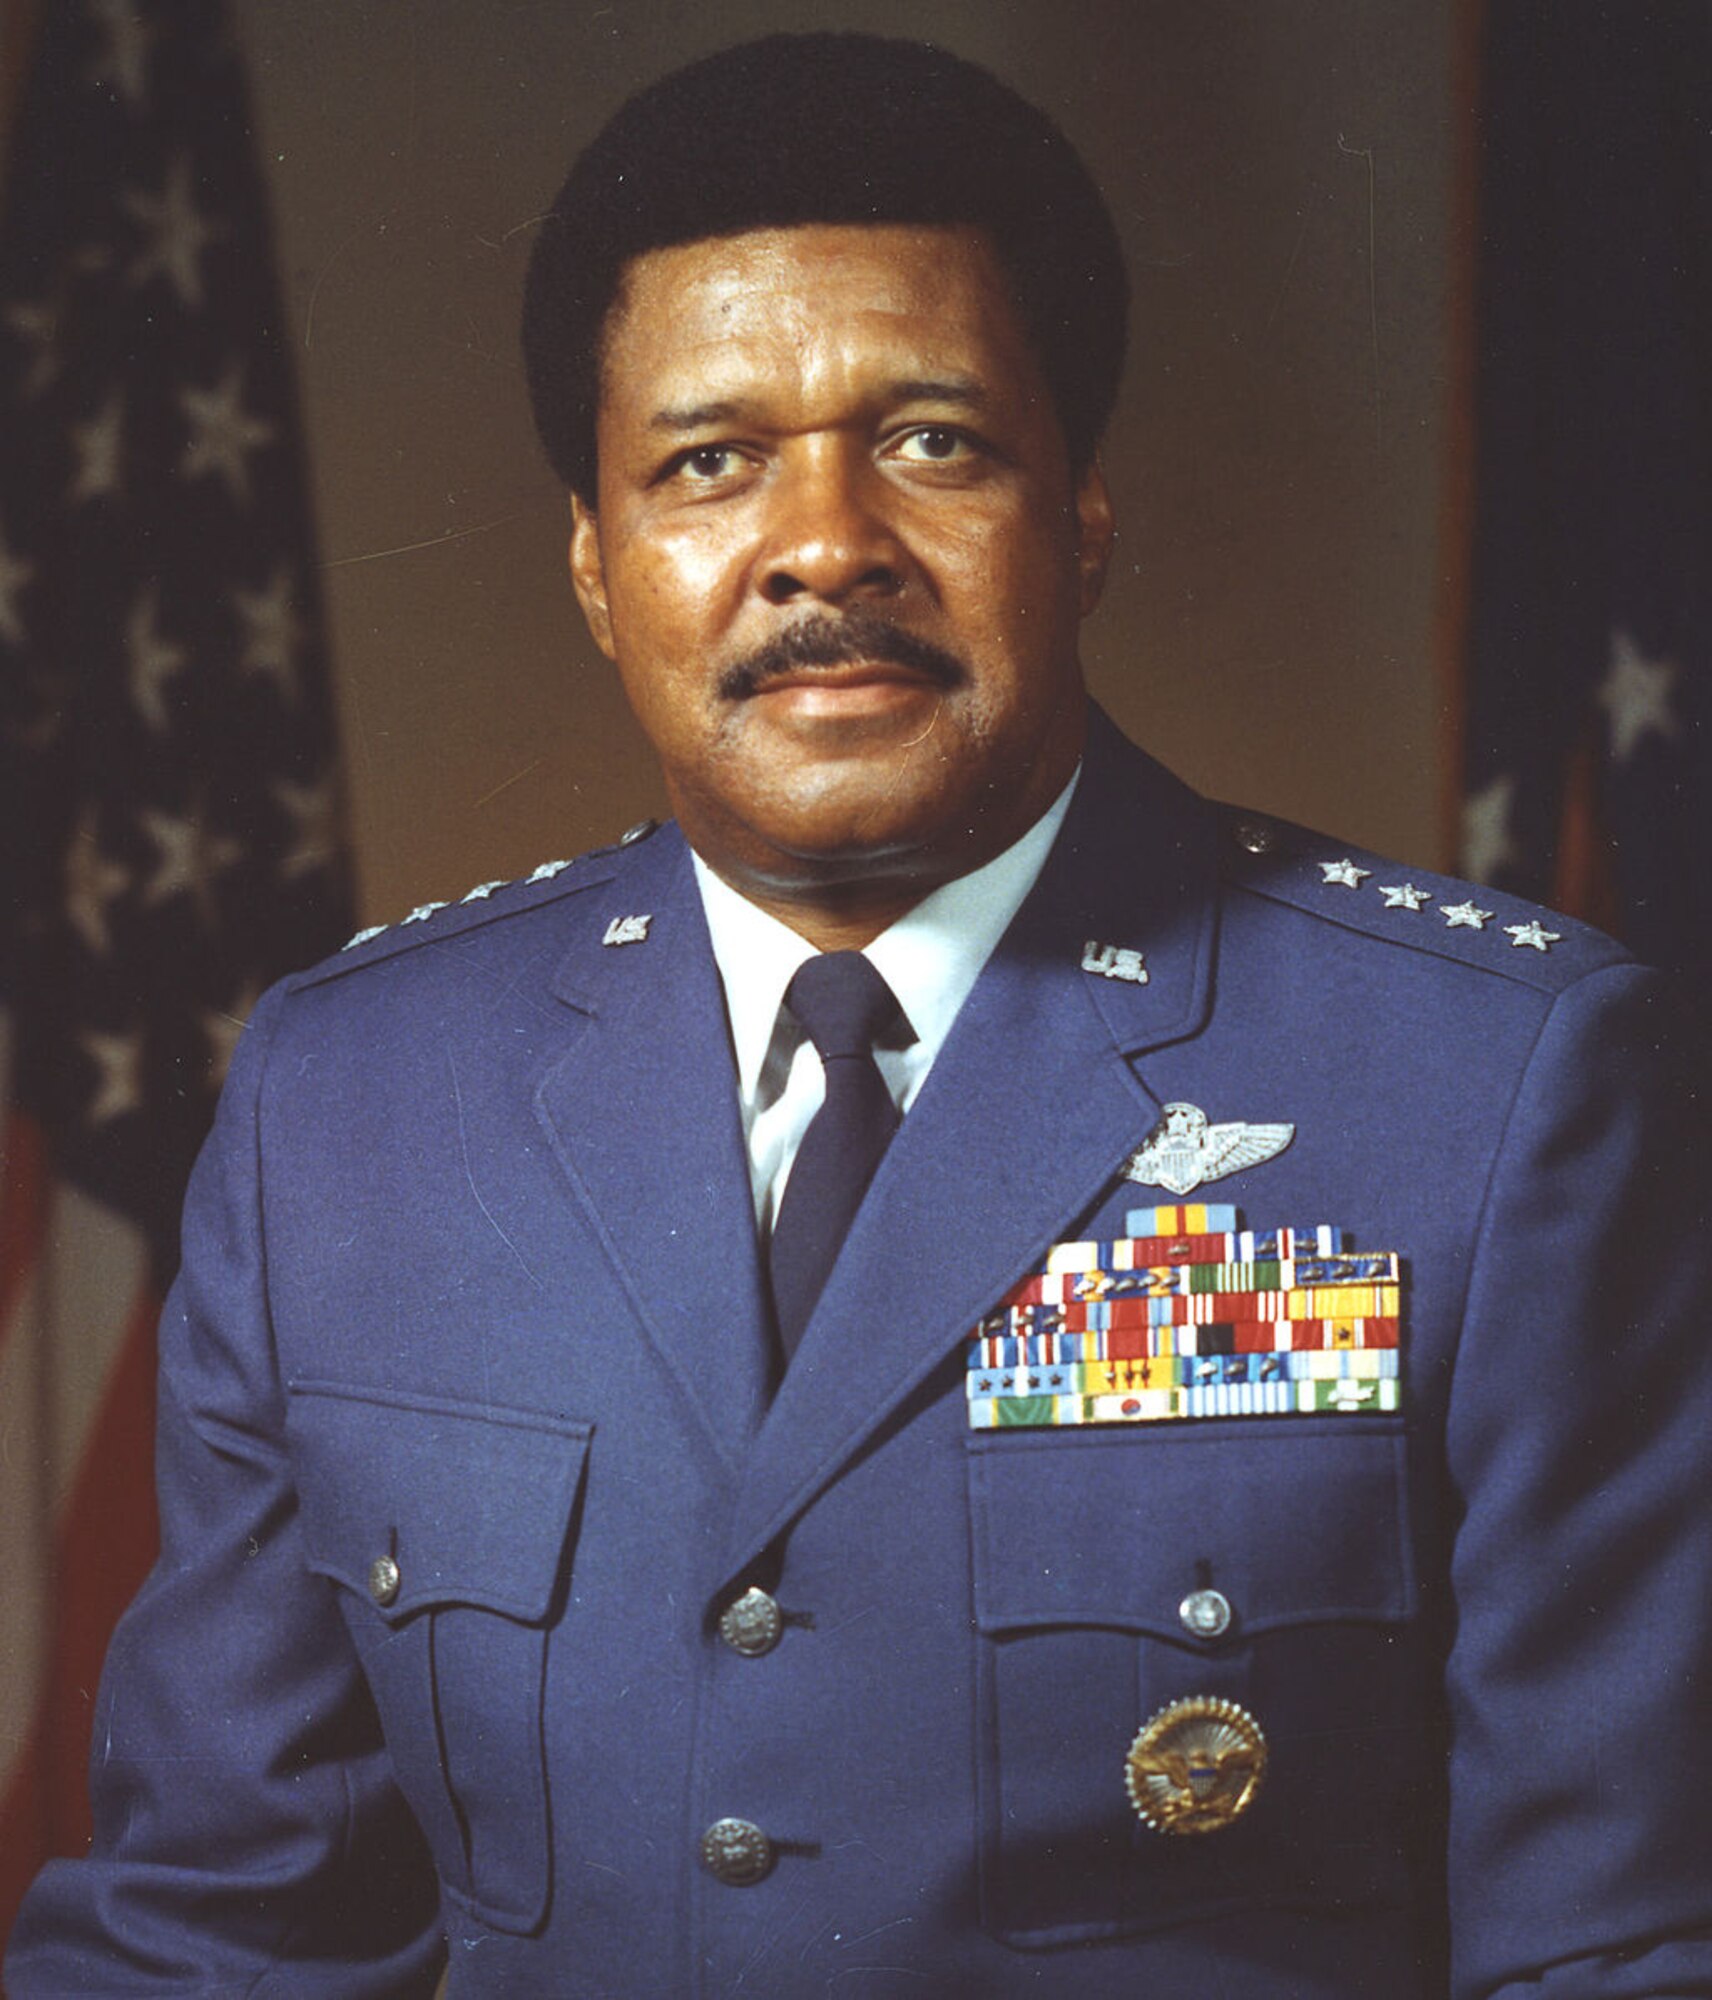 Gen. Daniel R. “Chappie” James Jr. (1920-1978), a Tuskegee Airmen who trained and served during World War II, became the first African American to achieve the grade of four-star general in 1975. (U.S. Air Force photo)